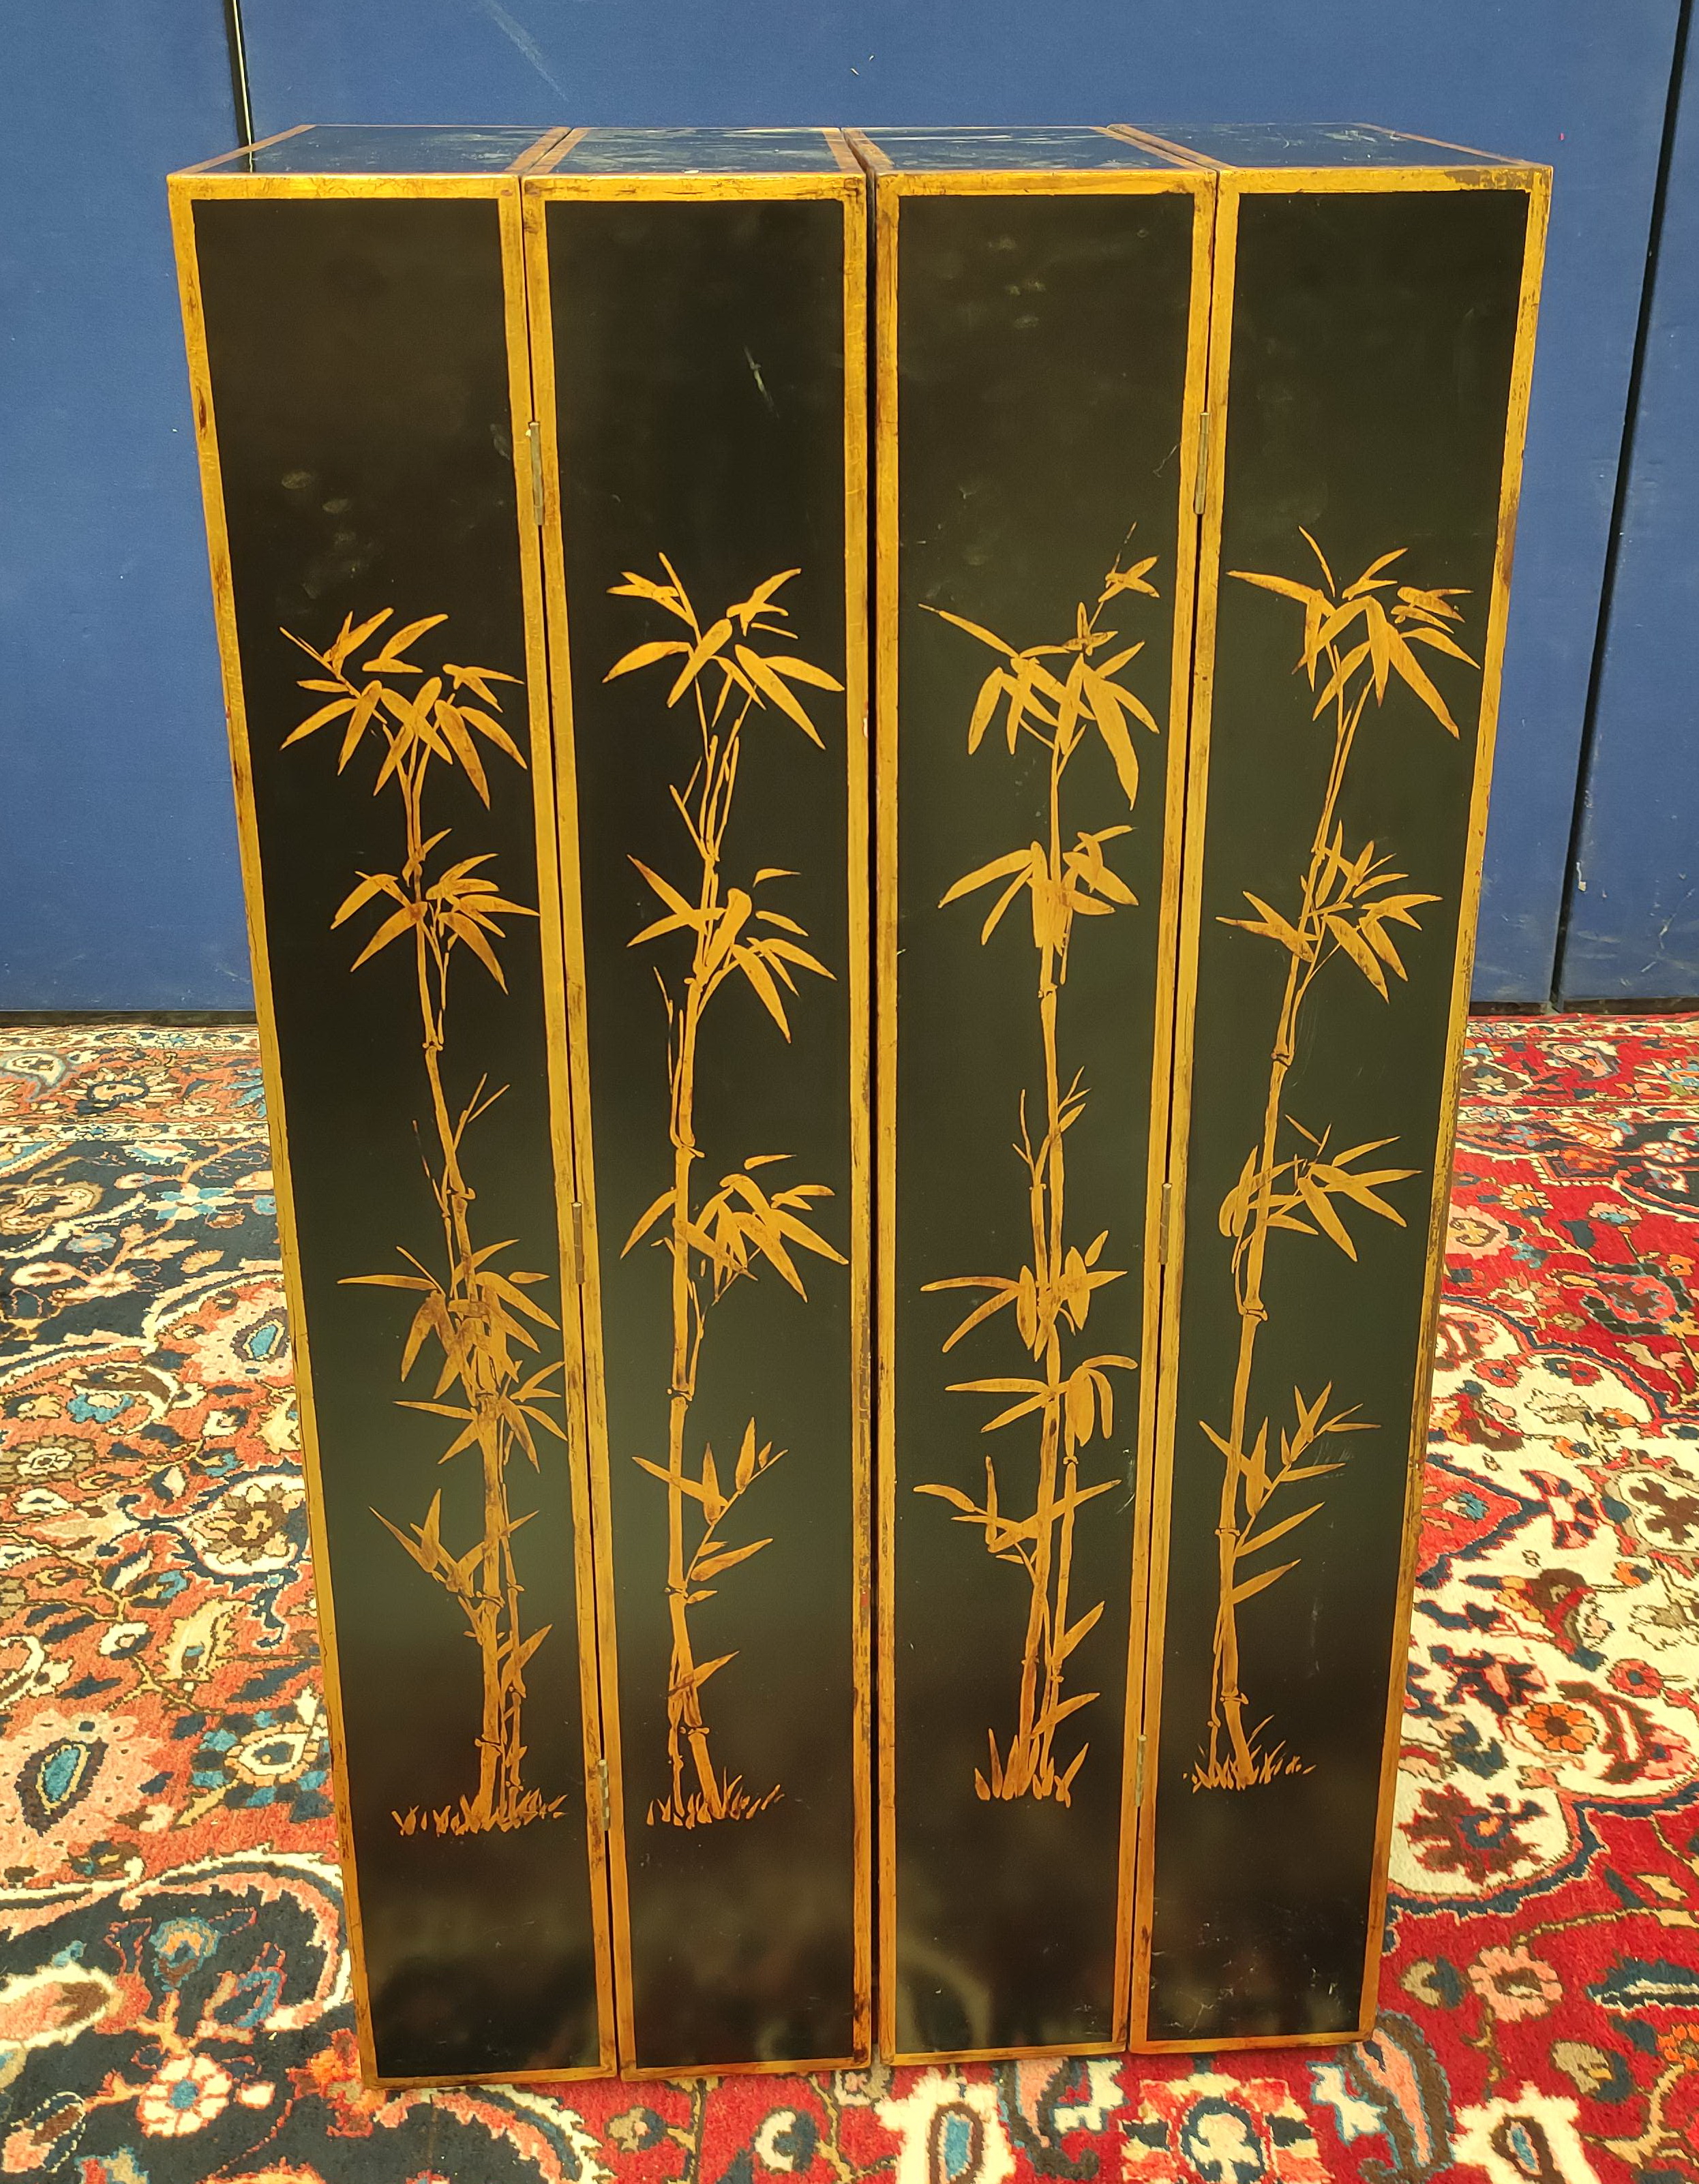 Chinese black lacquer and gilt screen divider in four sections with open shelving decorated with